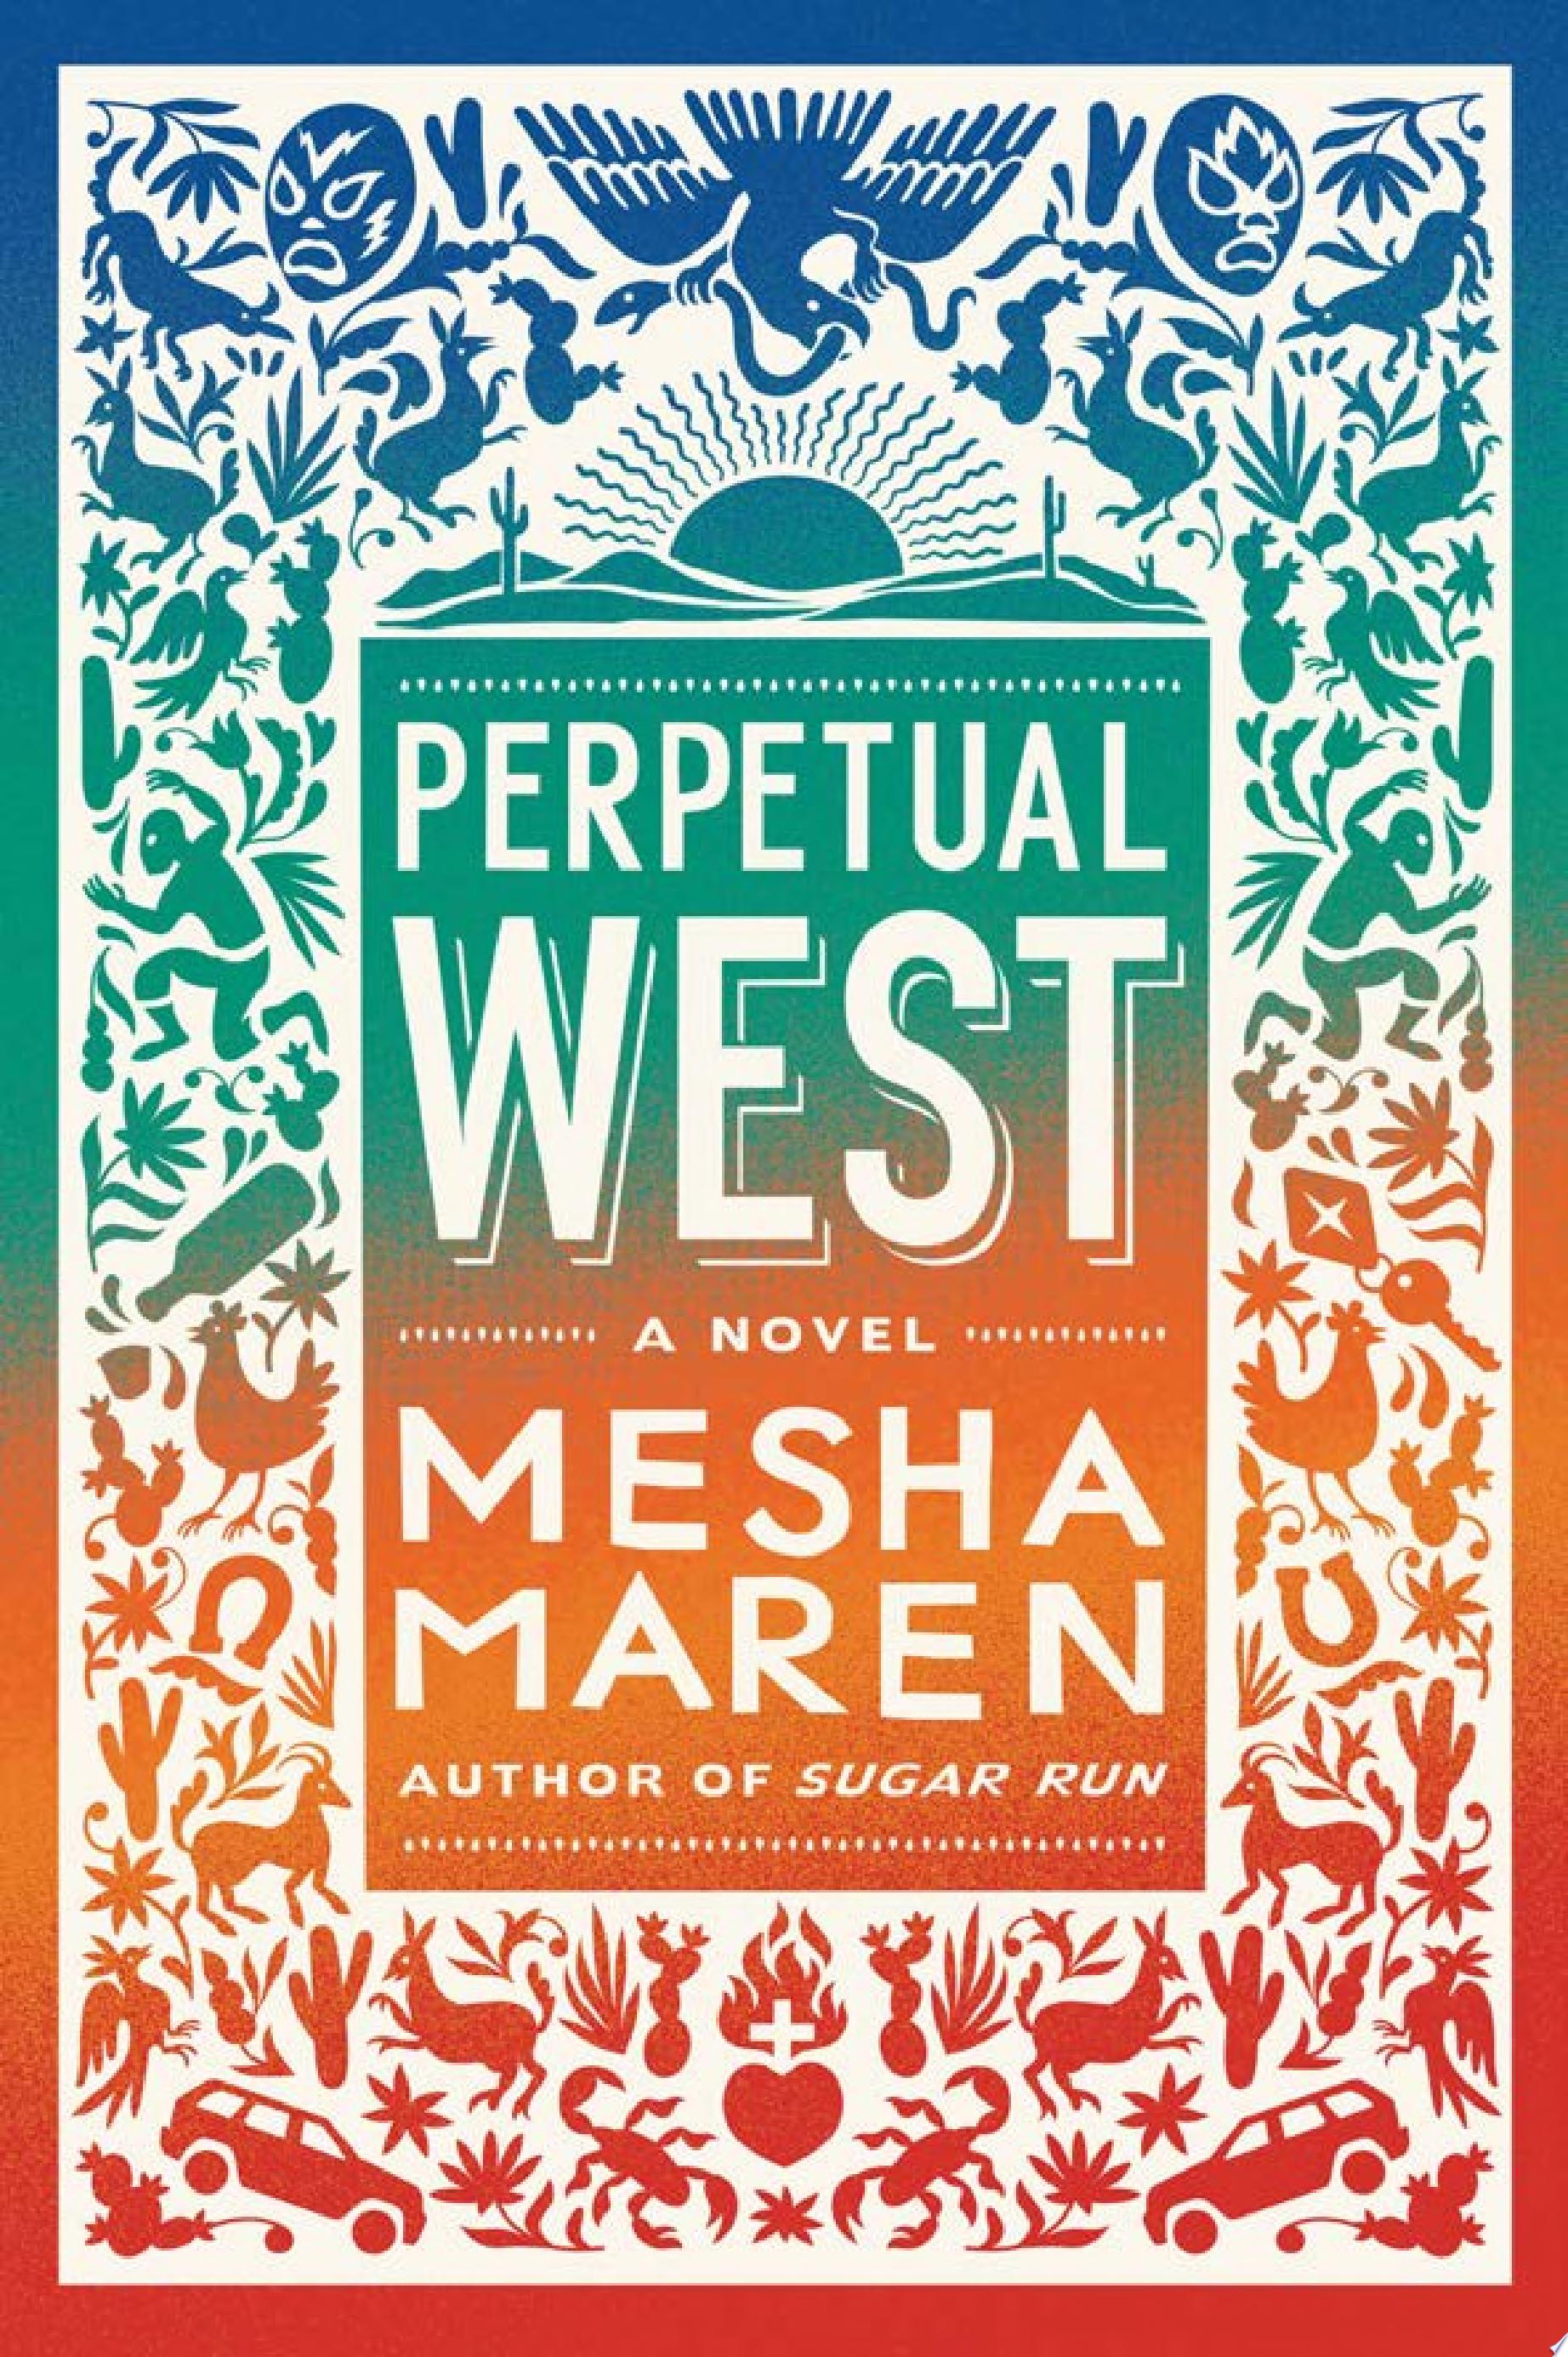 Image for "Perpetual West"